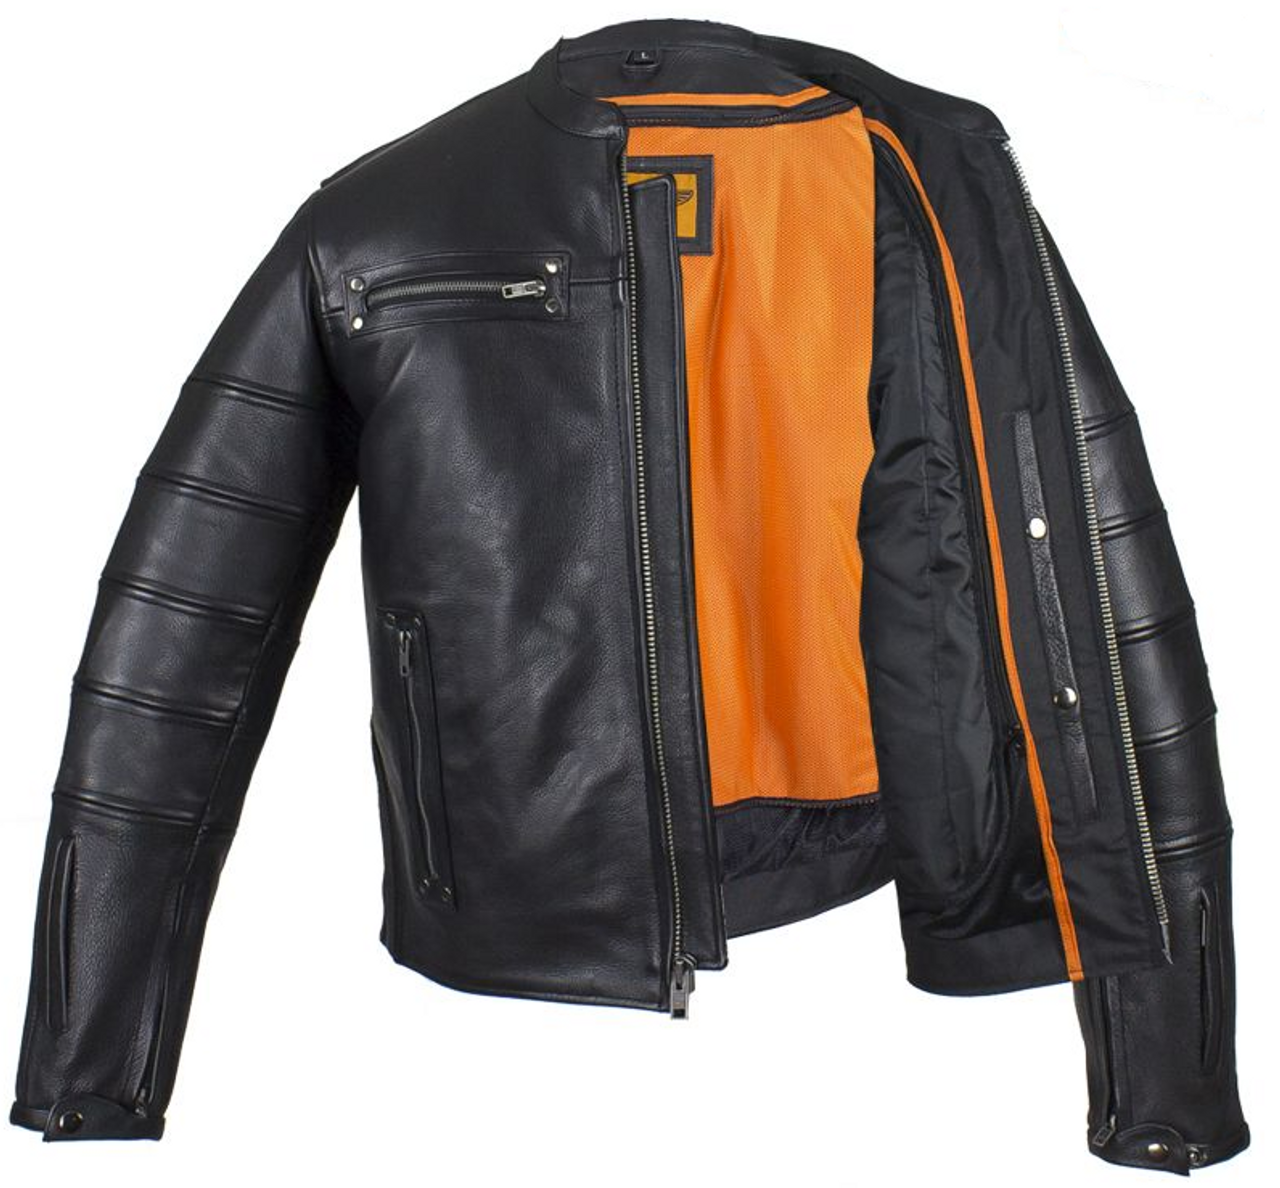 Black Pleated Racer Leather Jacket with Concealed Carry Pockets